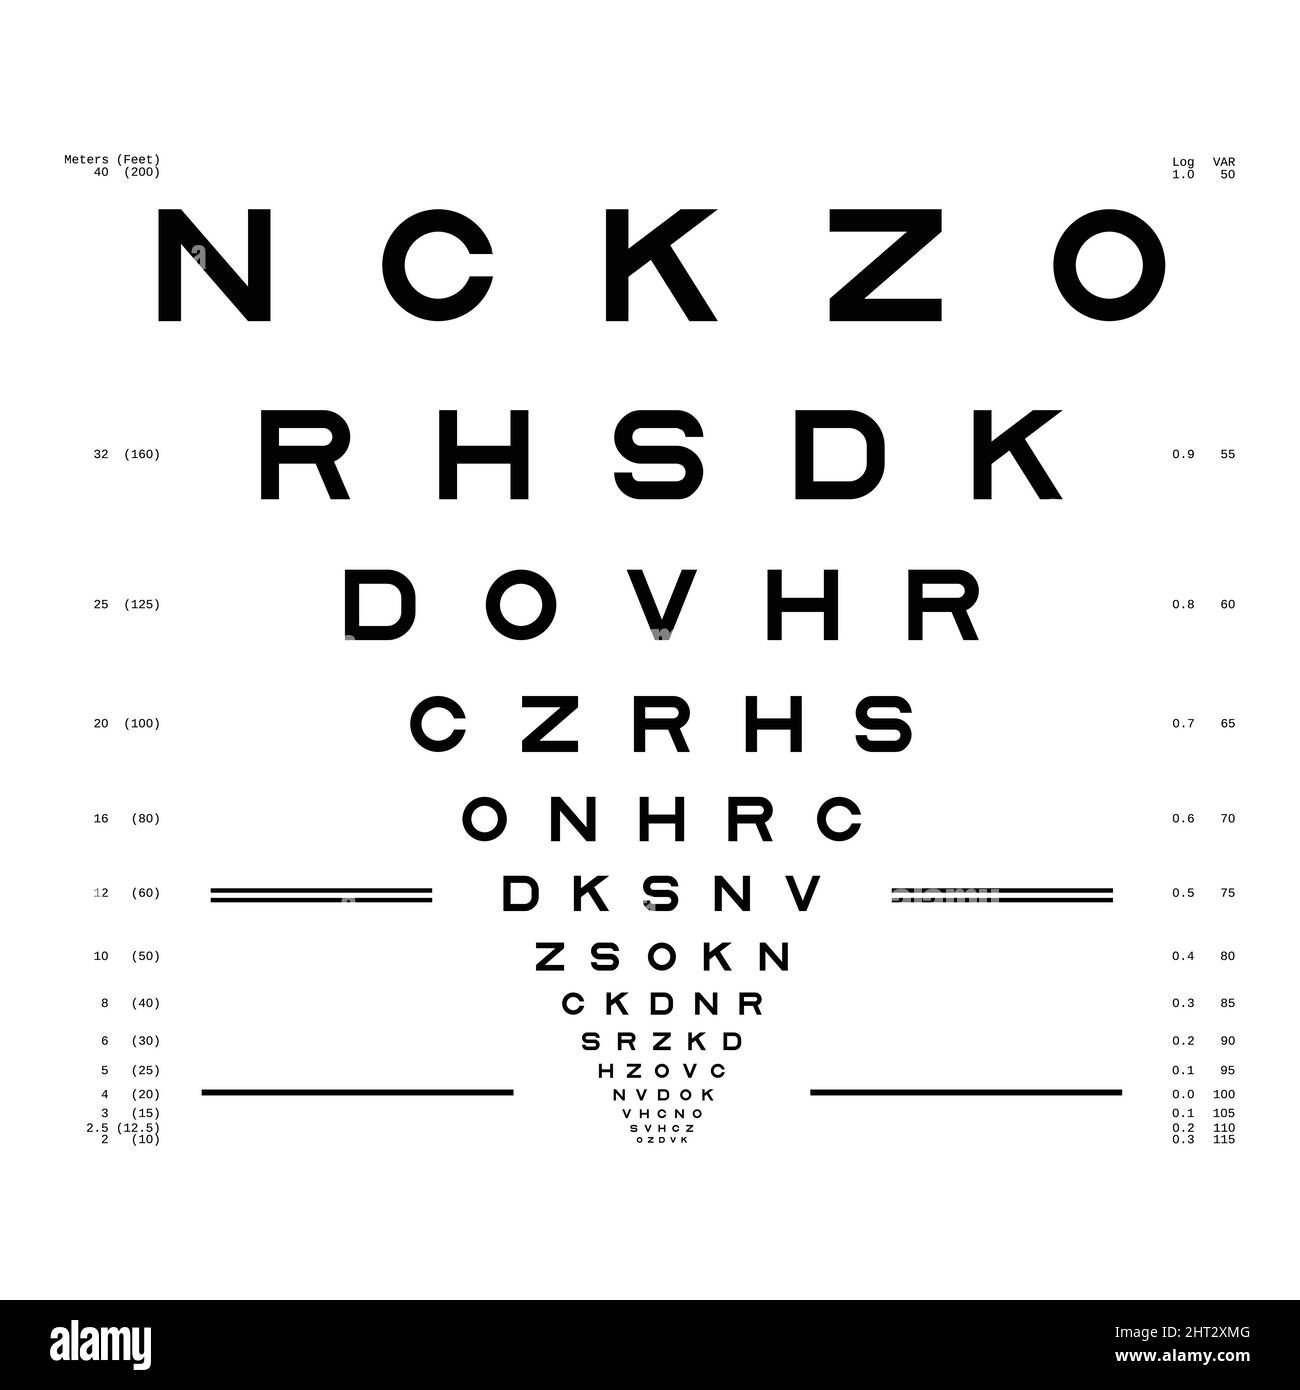 Snellen Eye Chart for Visual Acuity and Color Vision Test - A-Z Bookstore